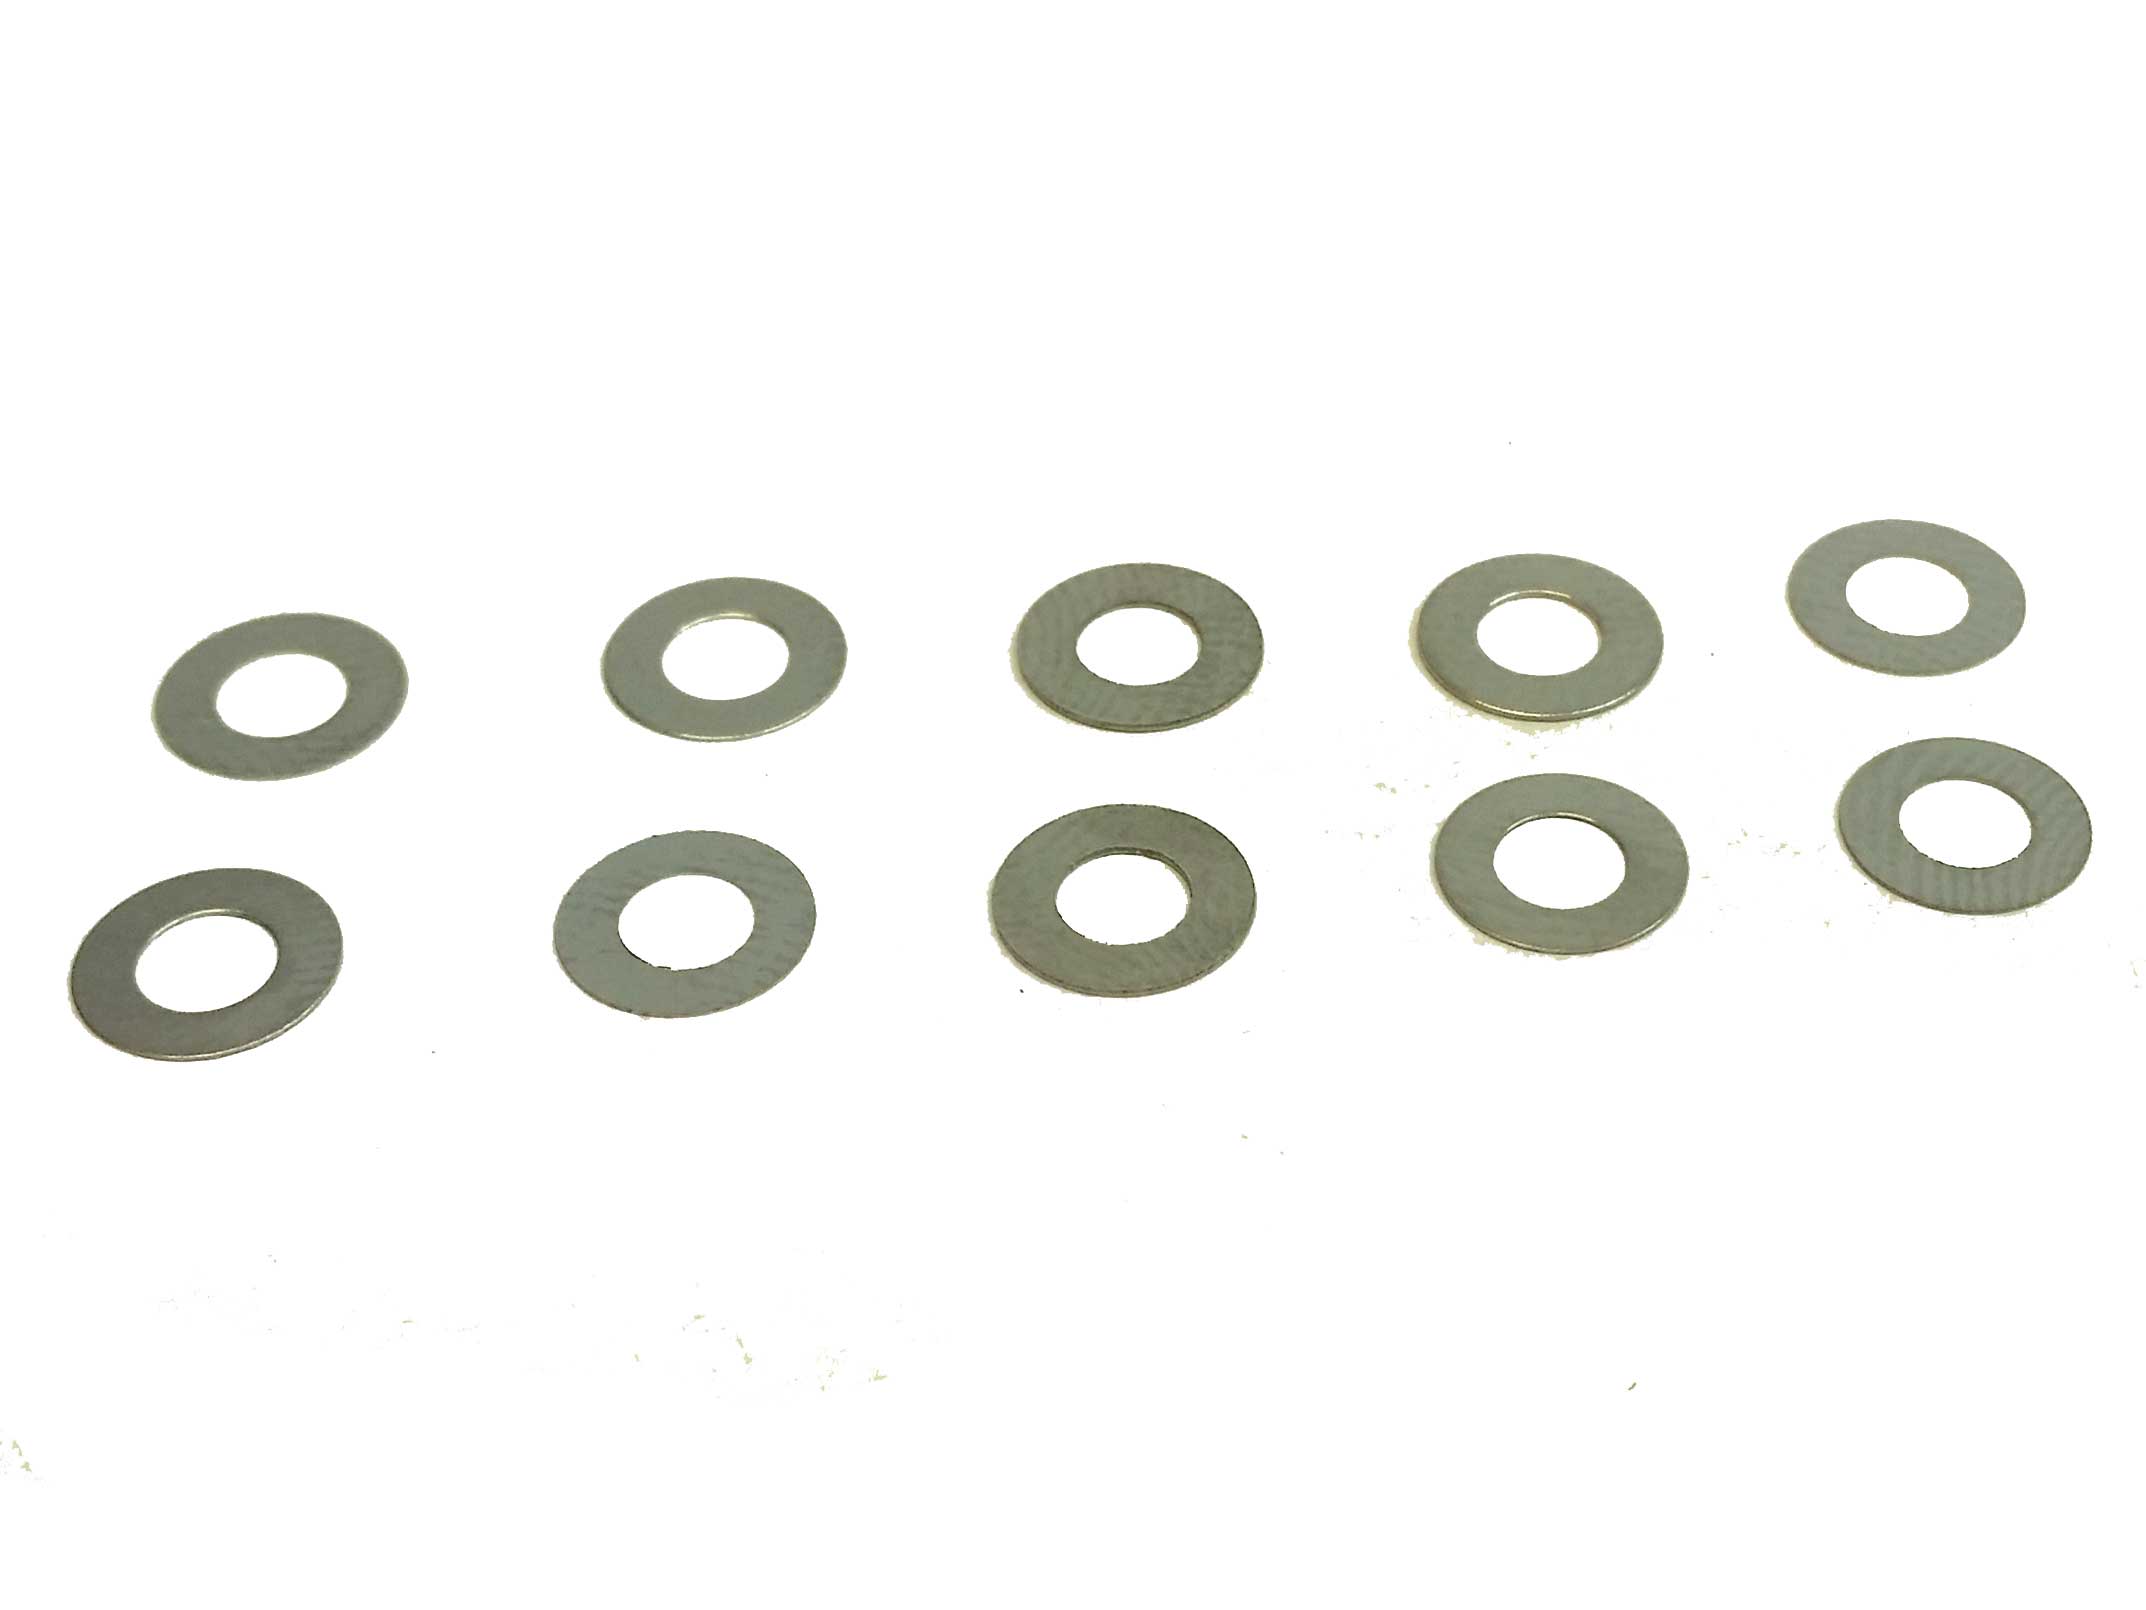 S-011-A 0.1mm x 3mm STEEL AXLE SPACERS (10pcs)